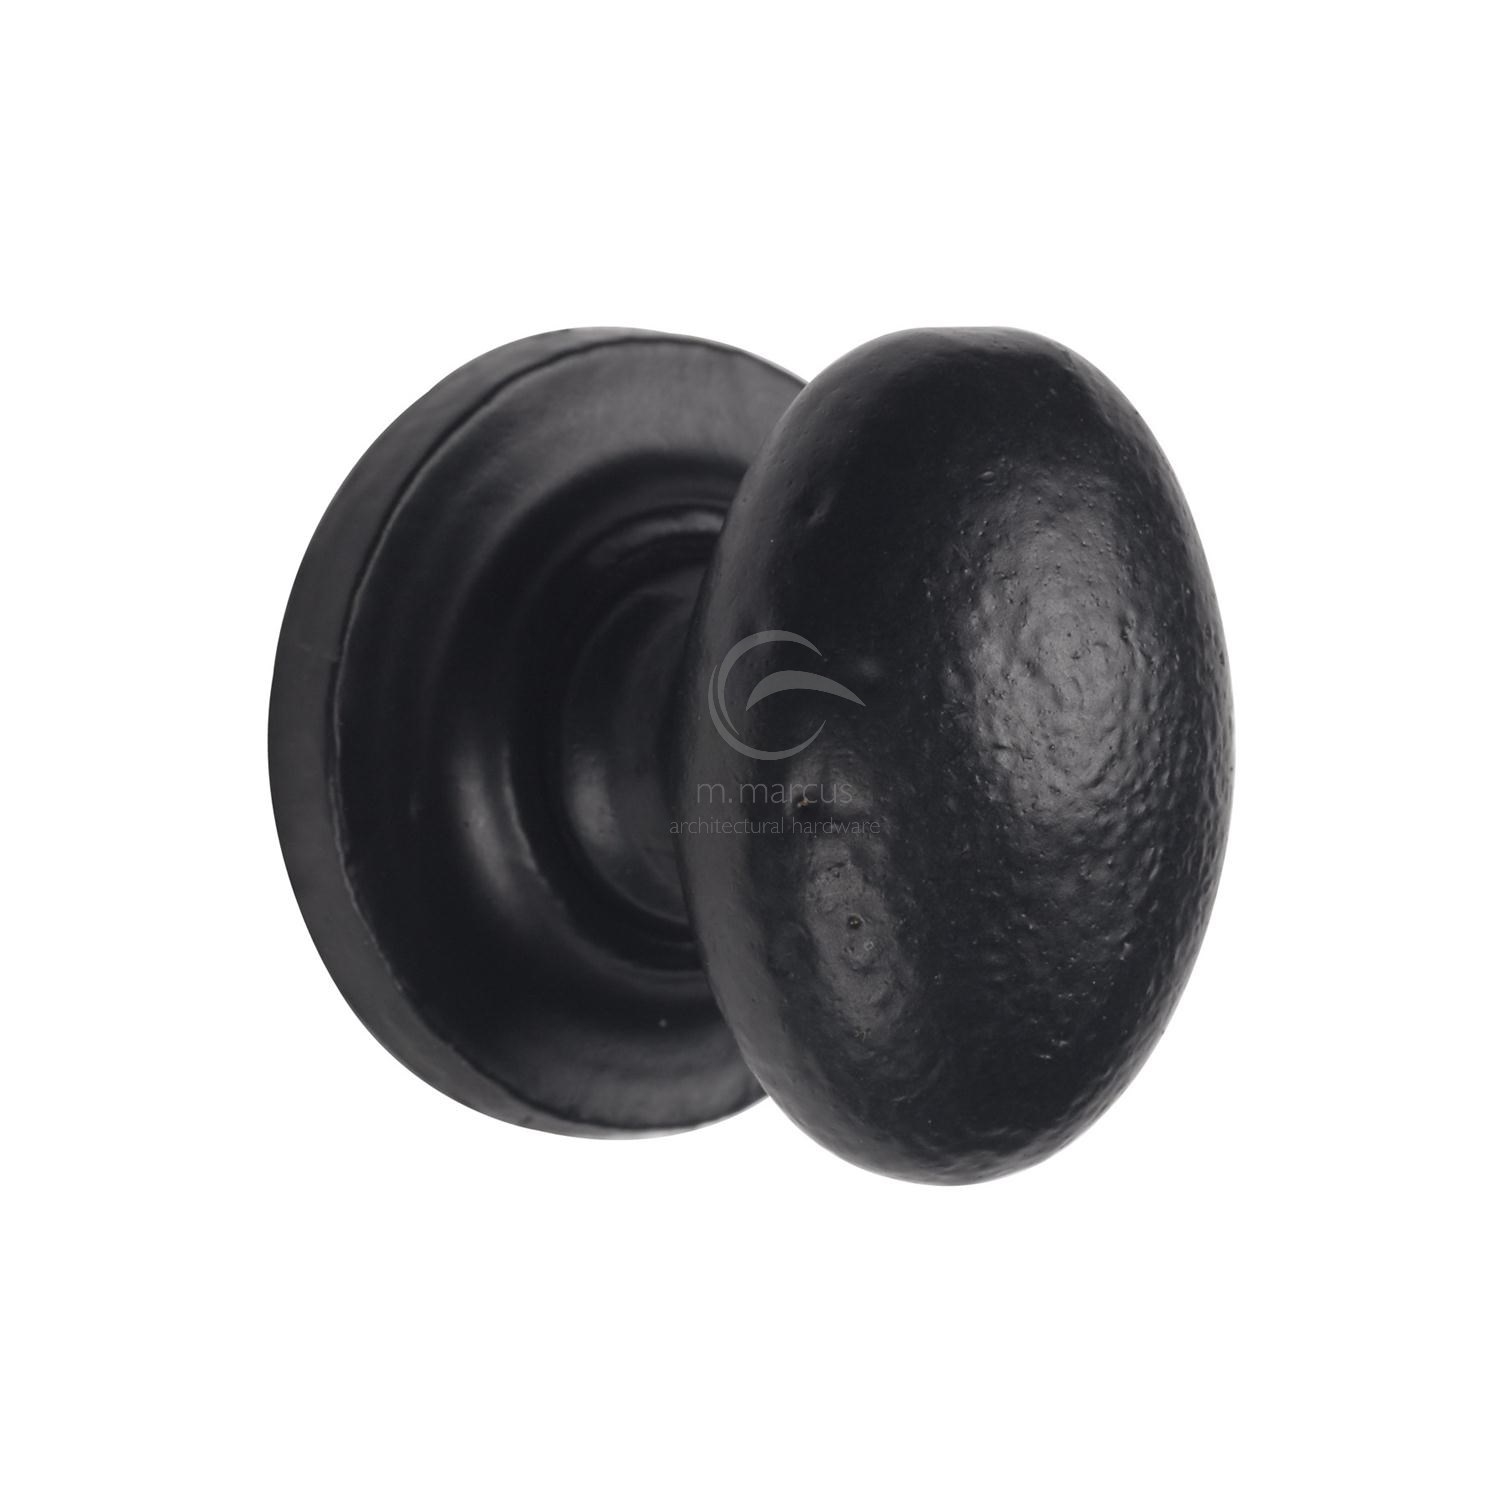 Black Iron Rustic Cabinet Knob on Round Plate Oval Design 38mm